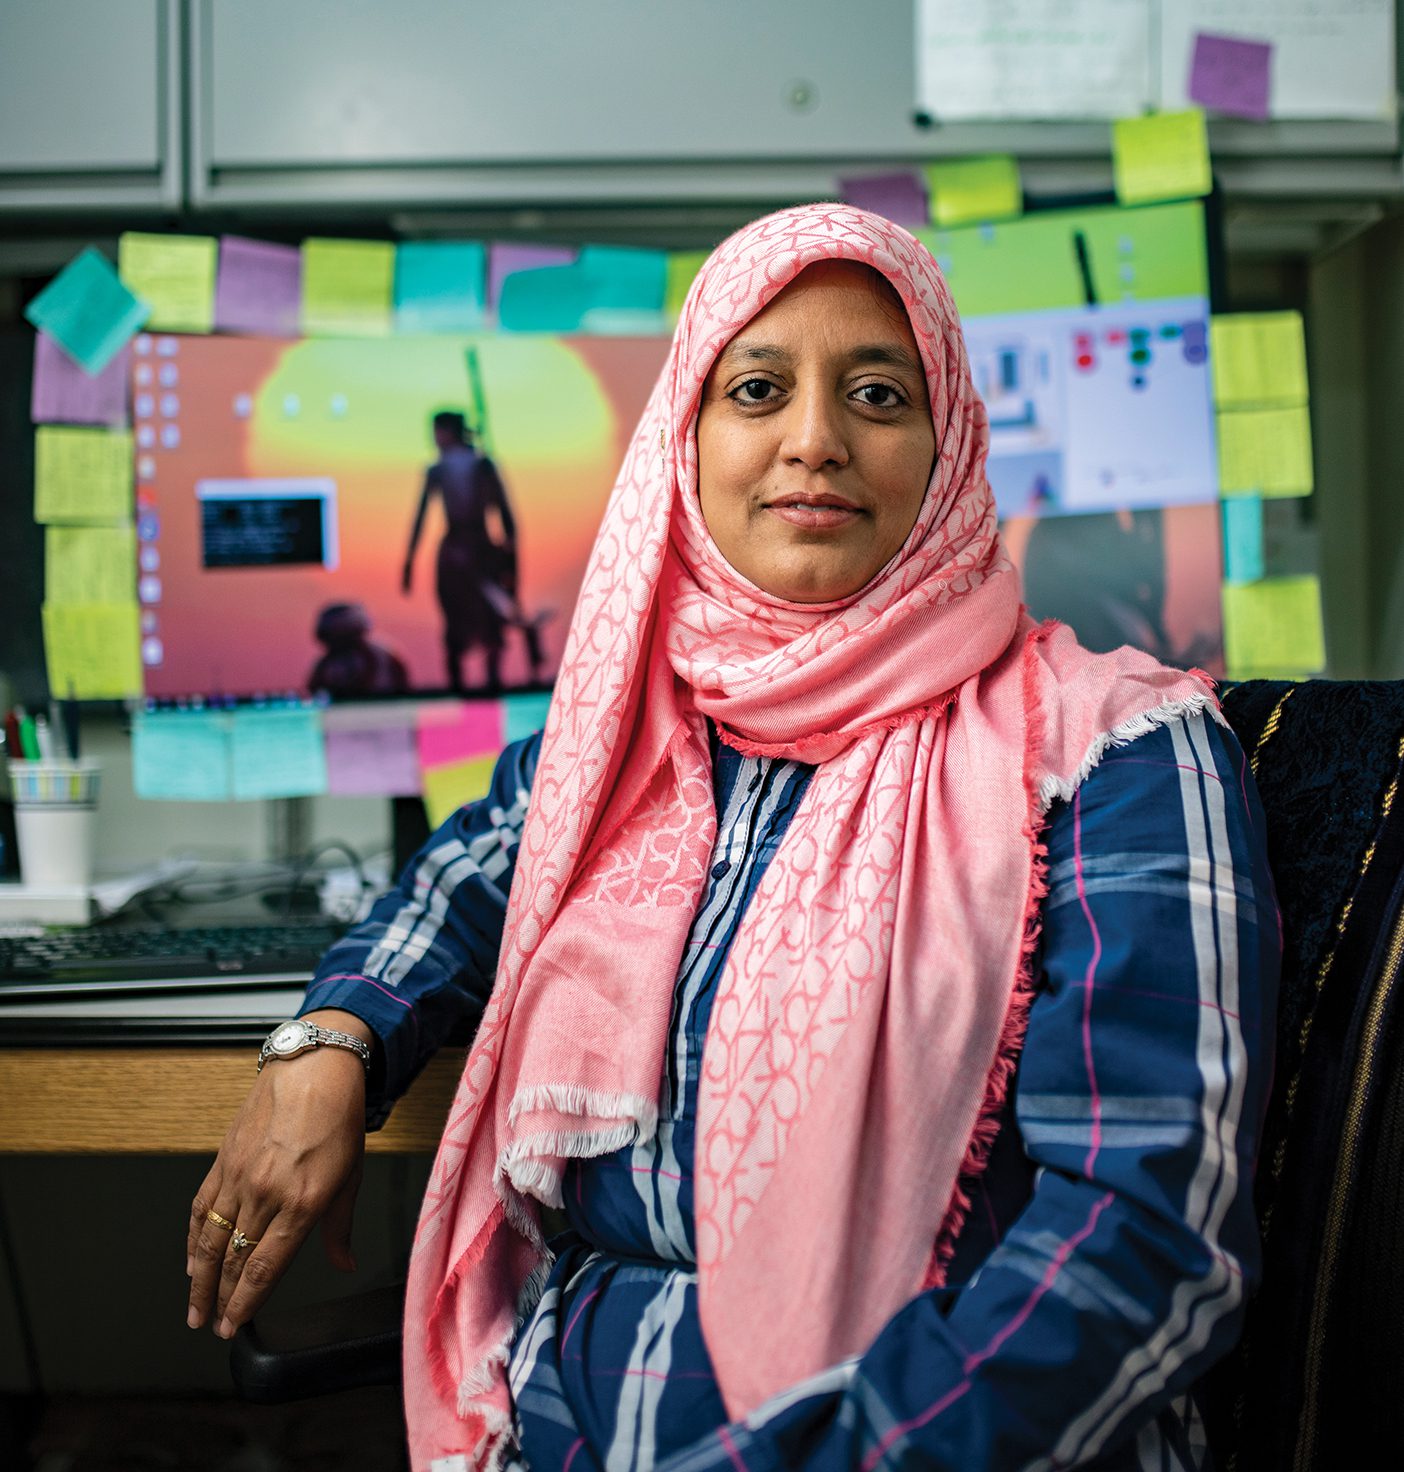 PhD student Meher Shaikh sits in front of her computer, which is ringed with colorful sticky notes.